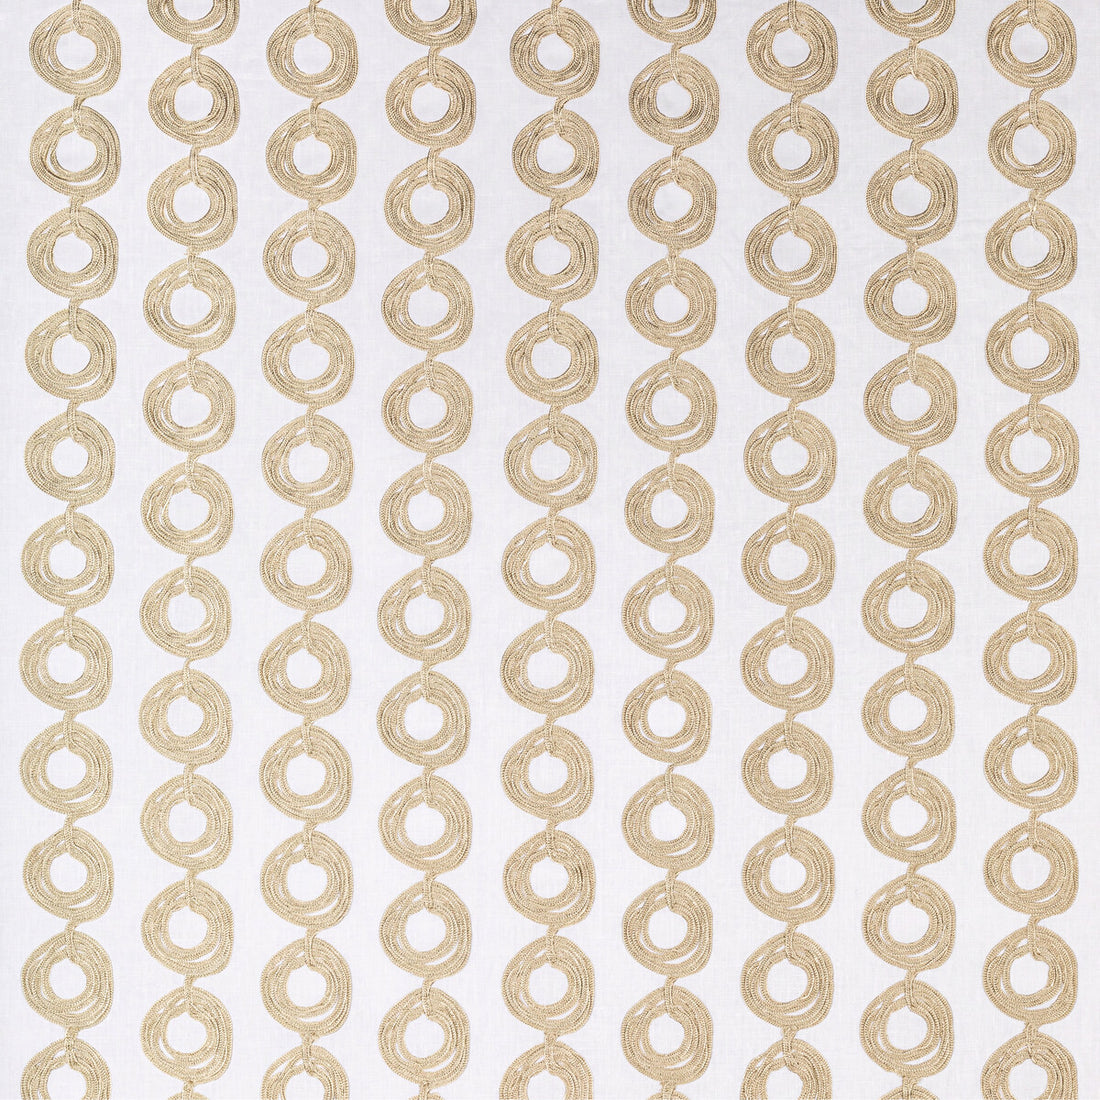 Coincide fabric in gold color - pattern 36338.4.0 - by Kravet Couture in the Modern Luxe III collection